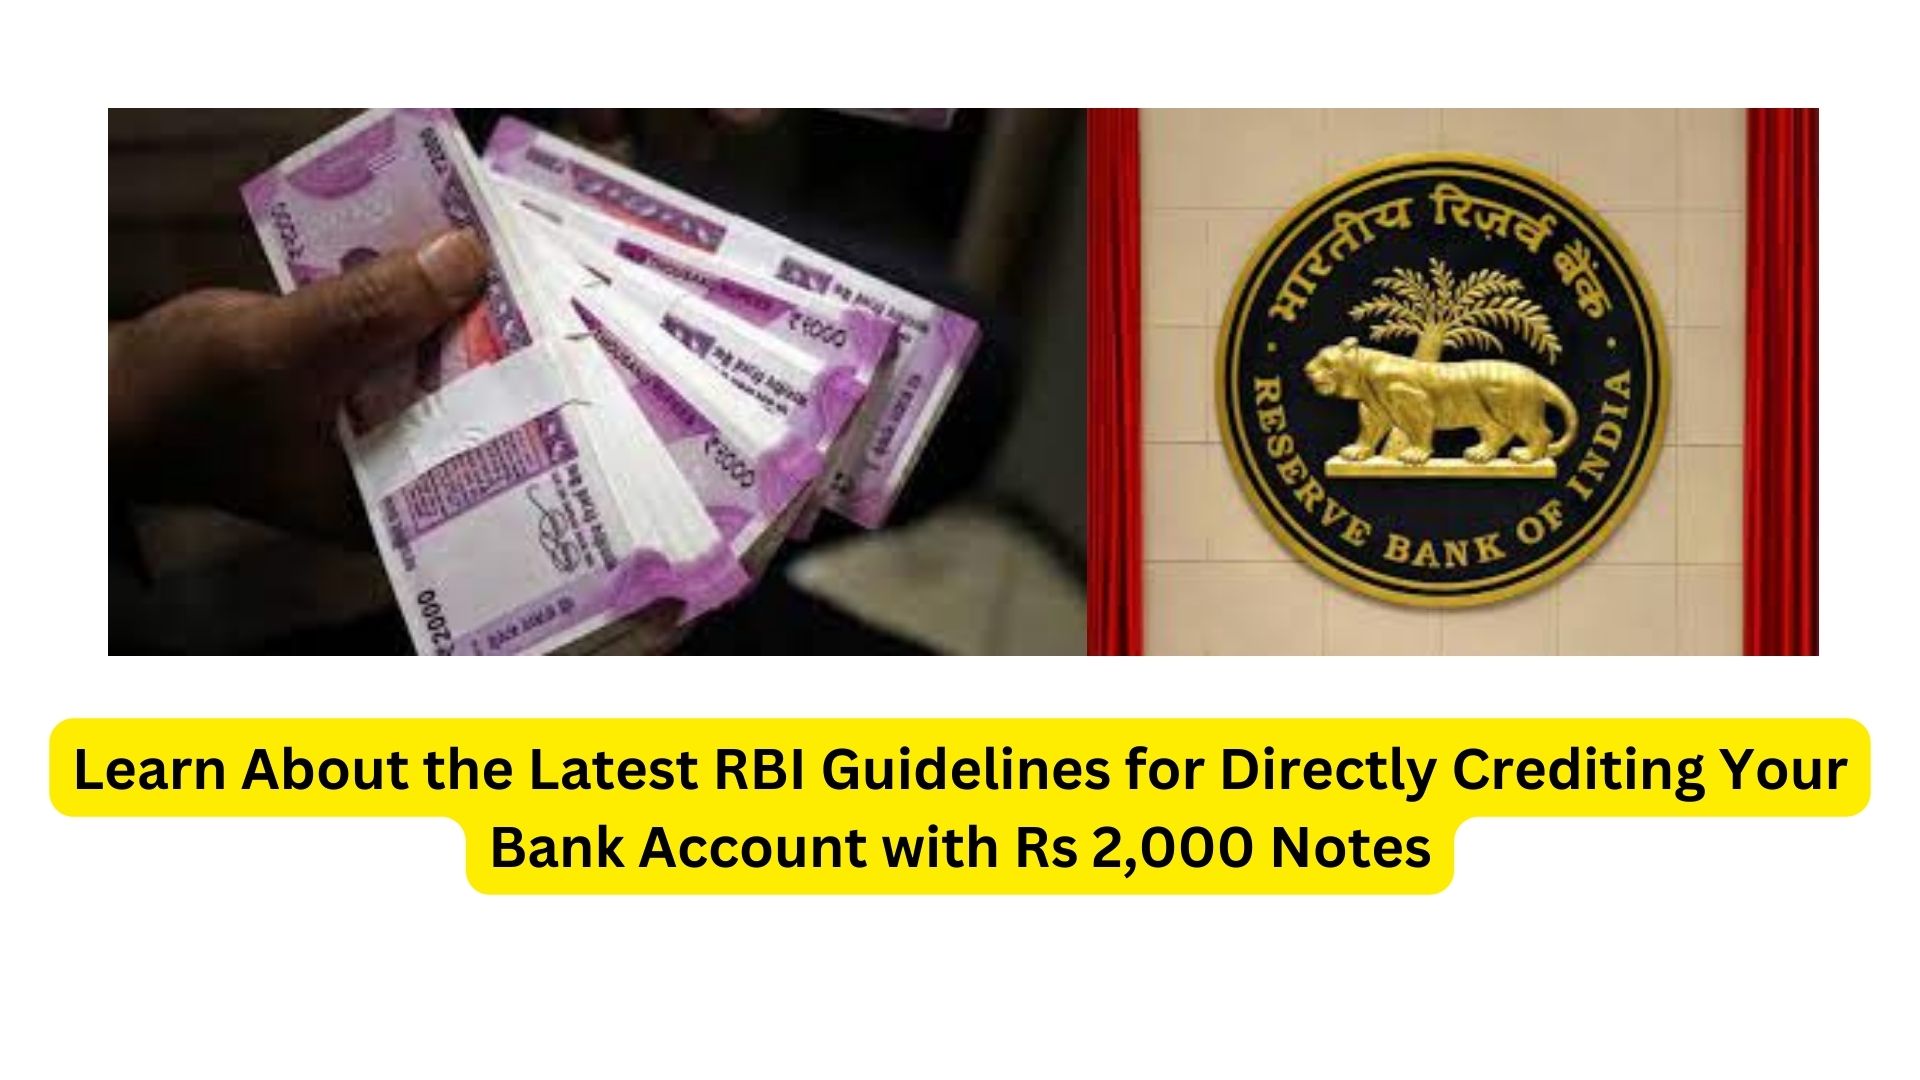 Learn About the Latest RBI Guidelines for Directly Crediting Your Bank Account with Rs 2,000 Notes